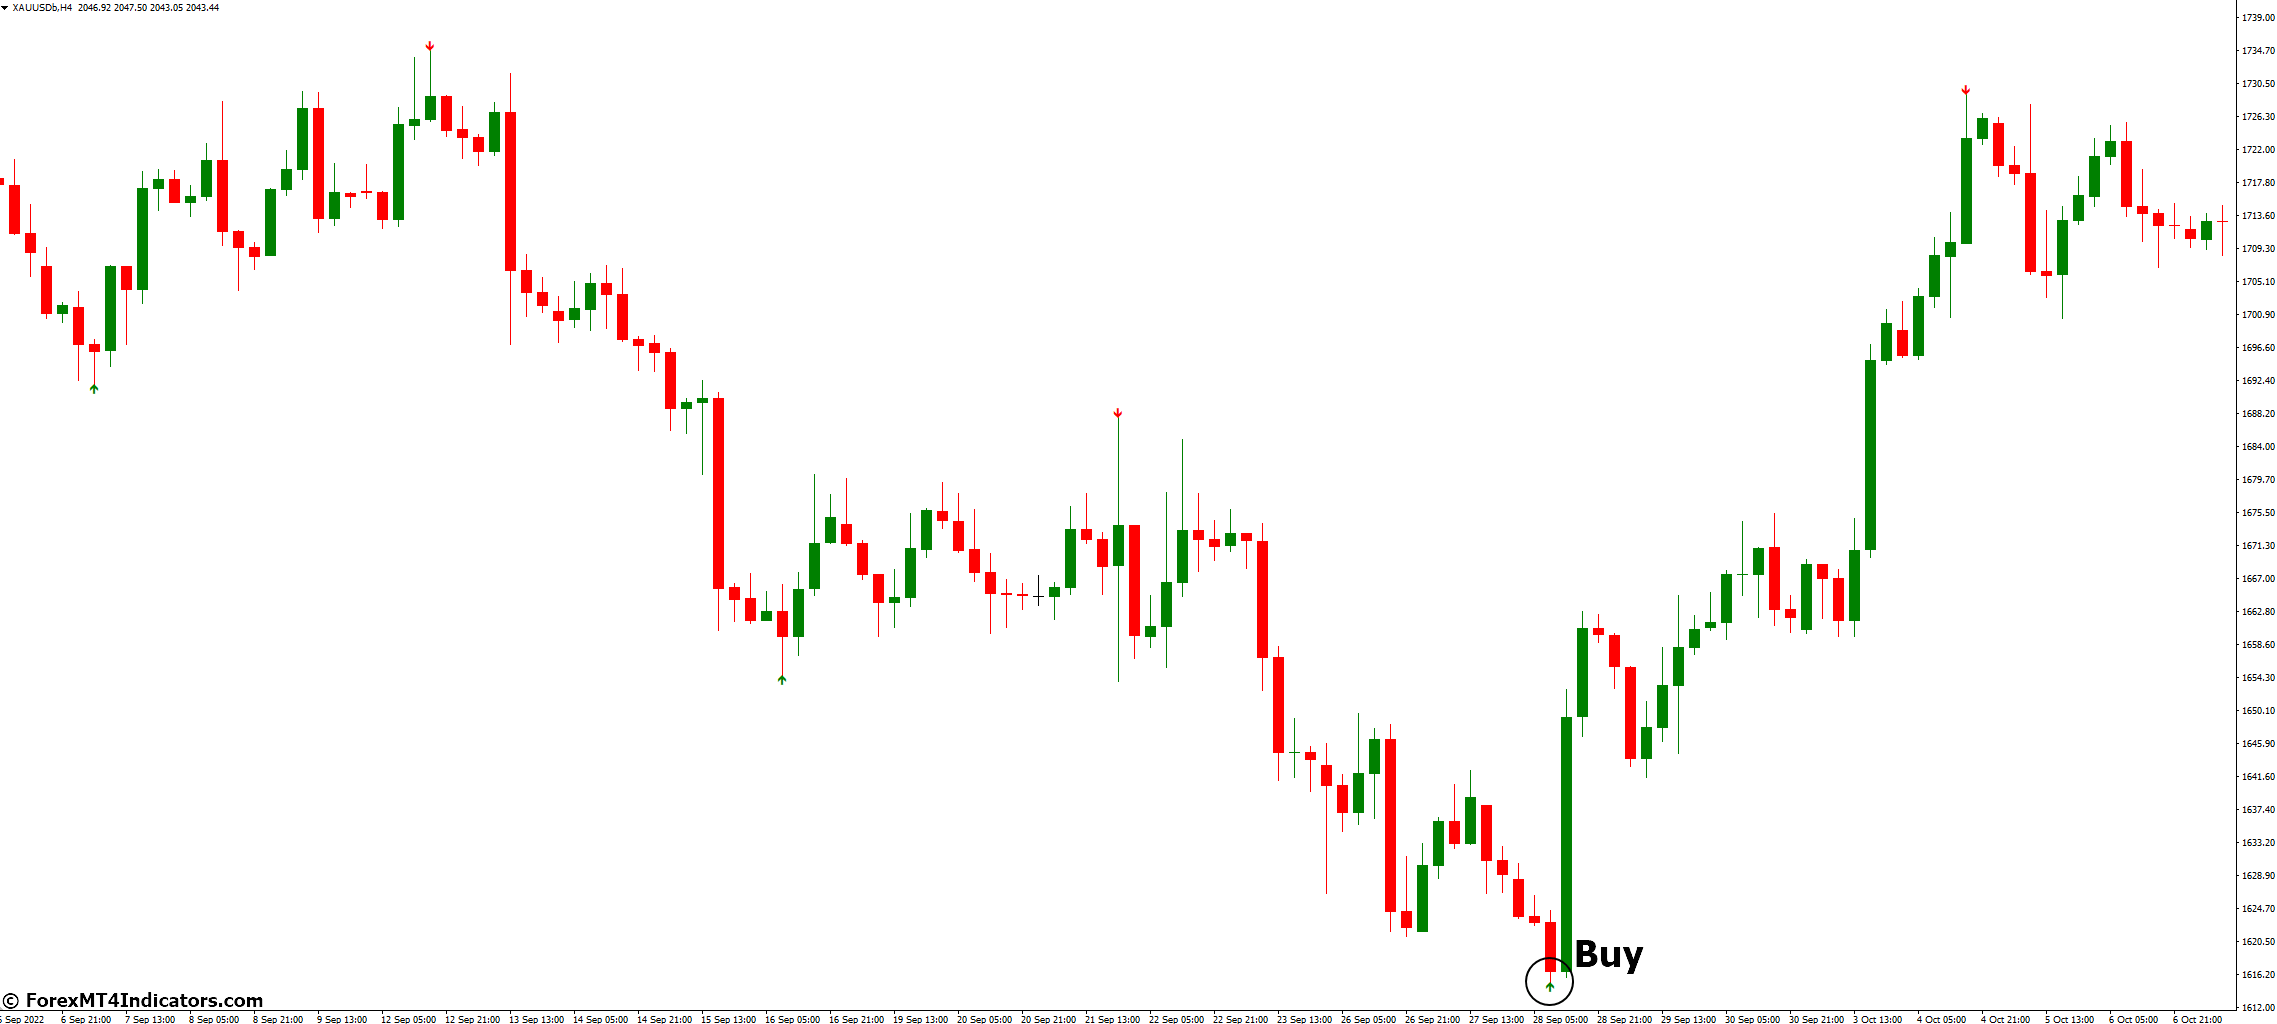 How to Trade with Super Signal MT4 Indicator - Buy Entry